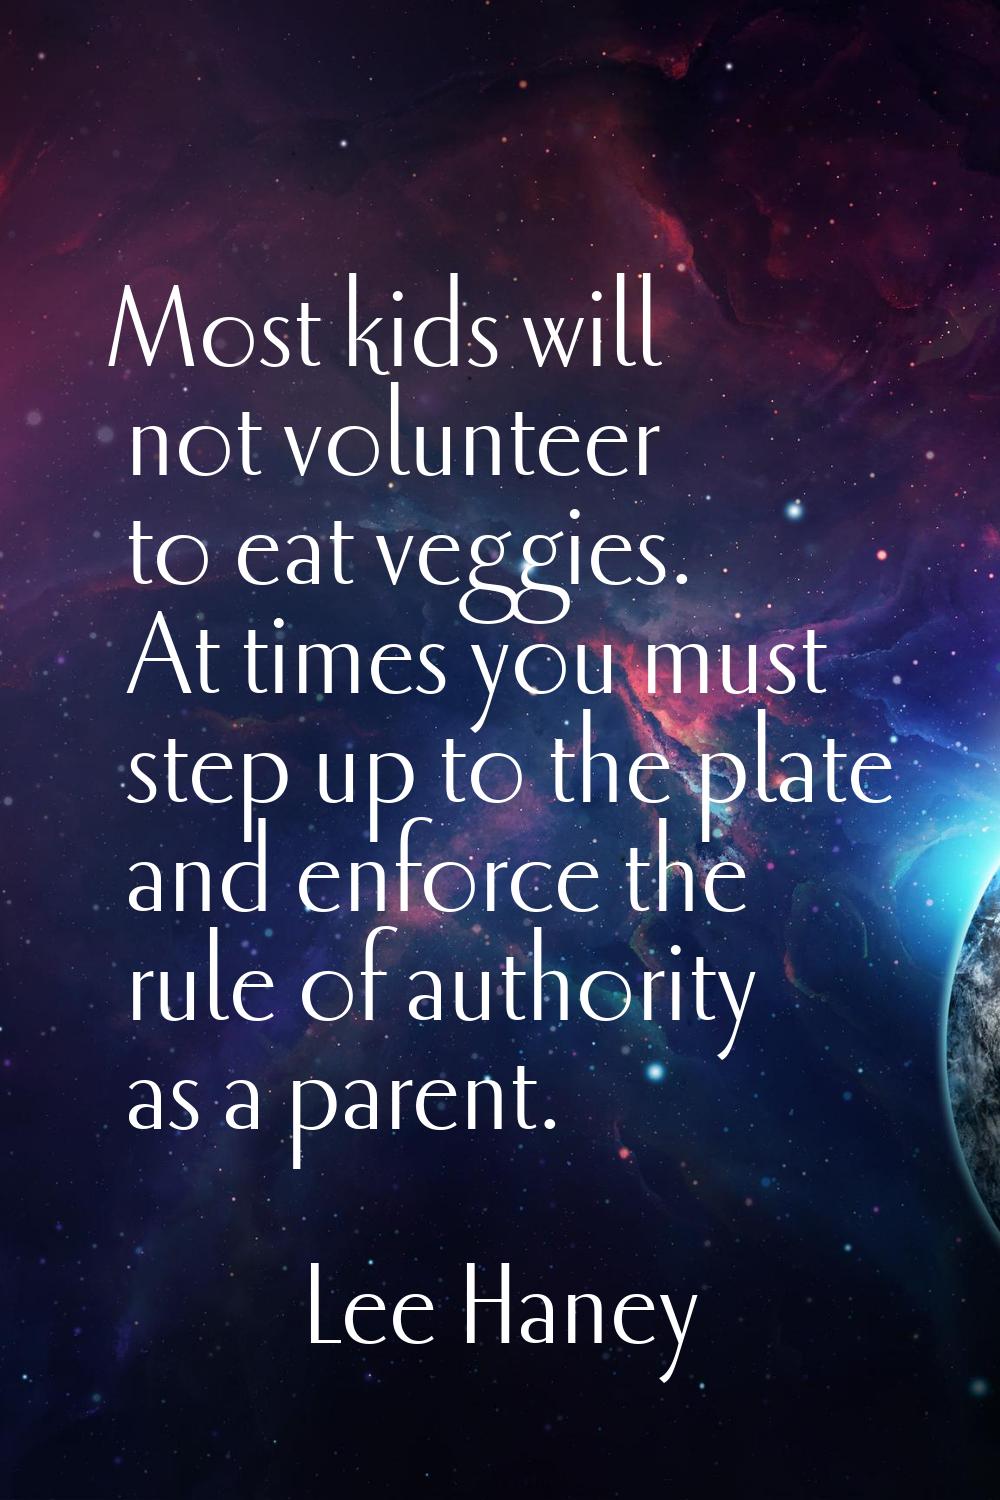 Most kids will not volunteer to eat veggies. At times you must step up to the plate and enforce the